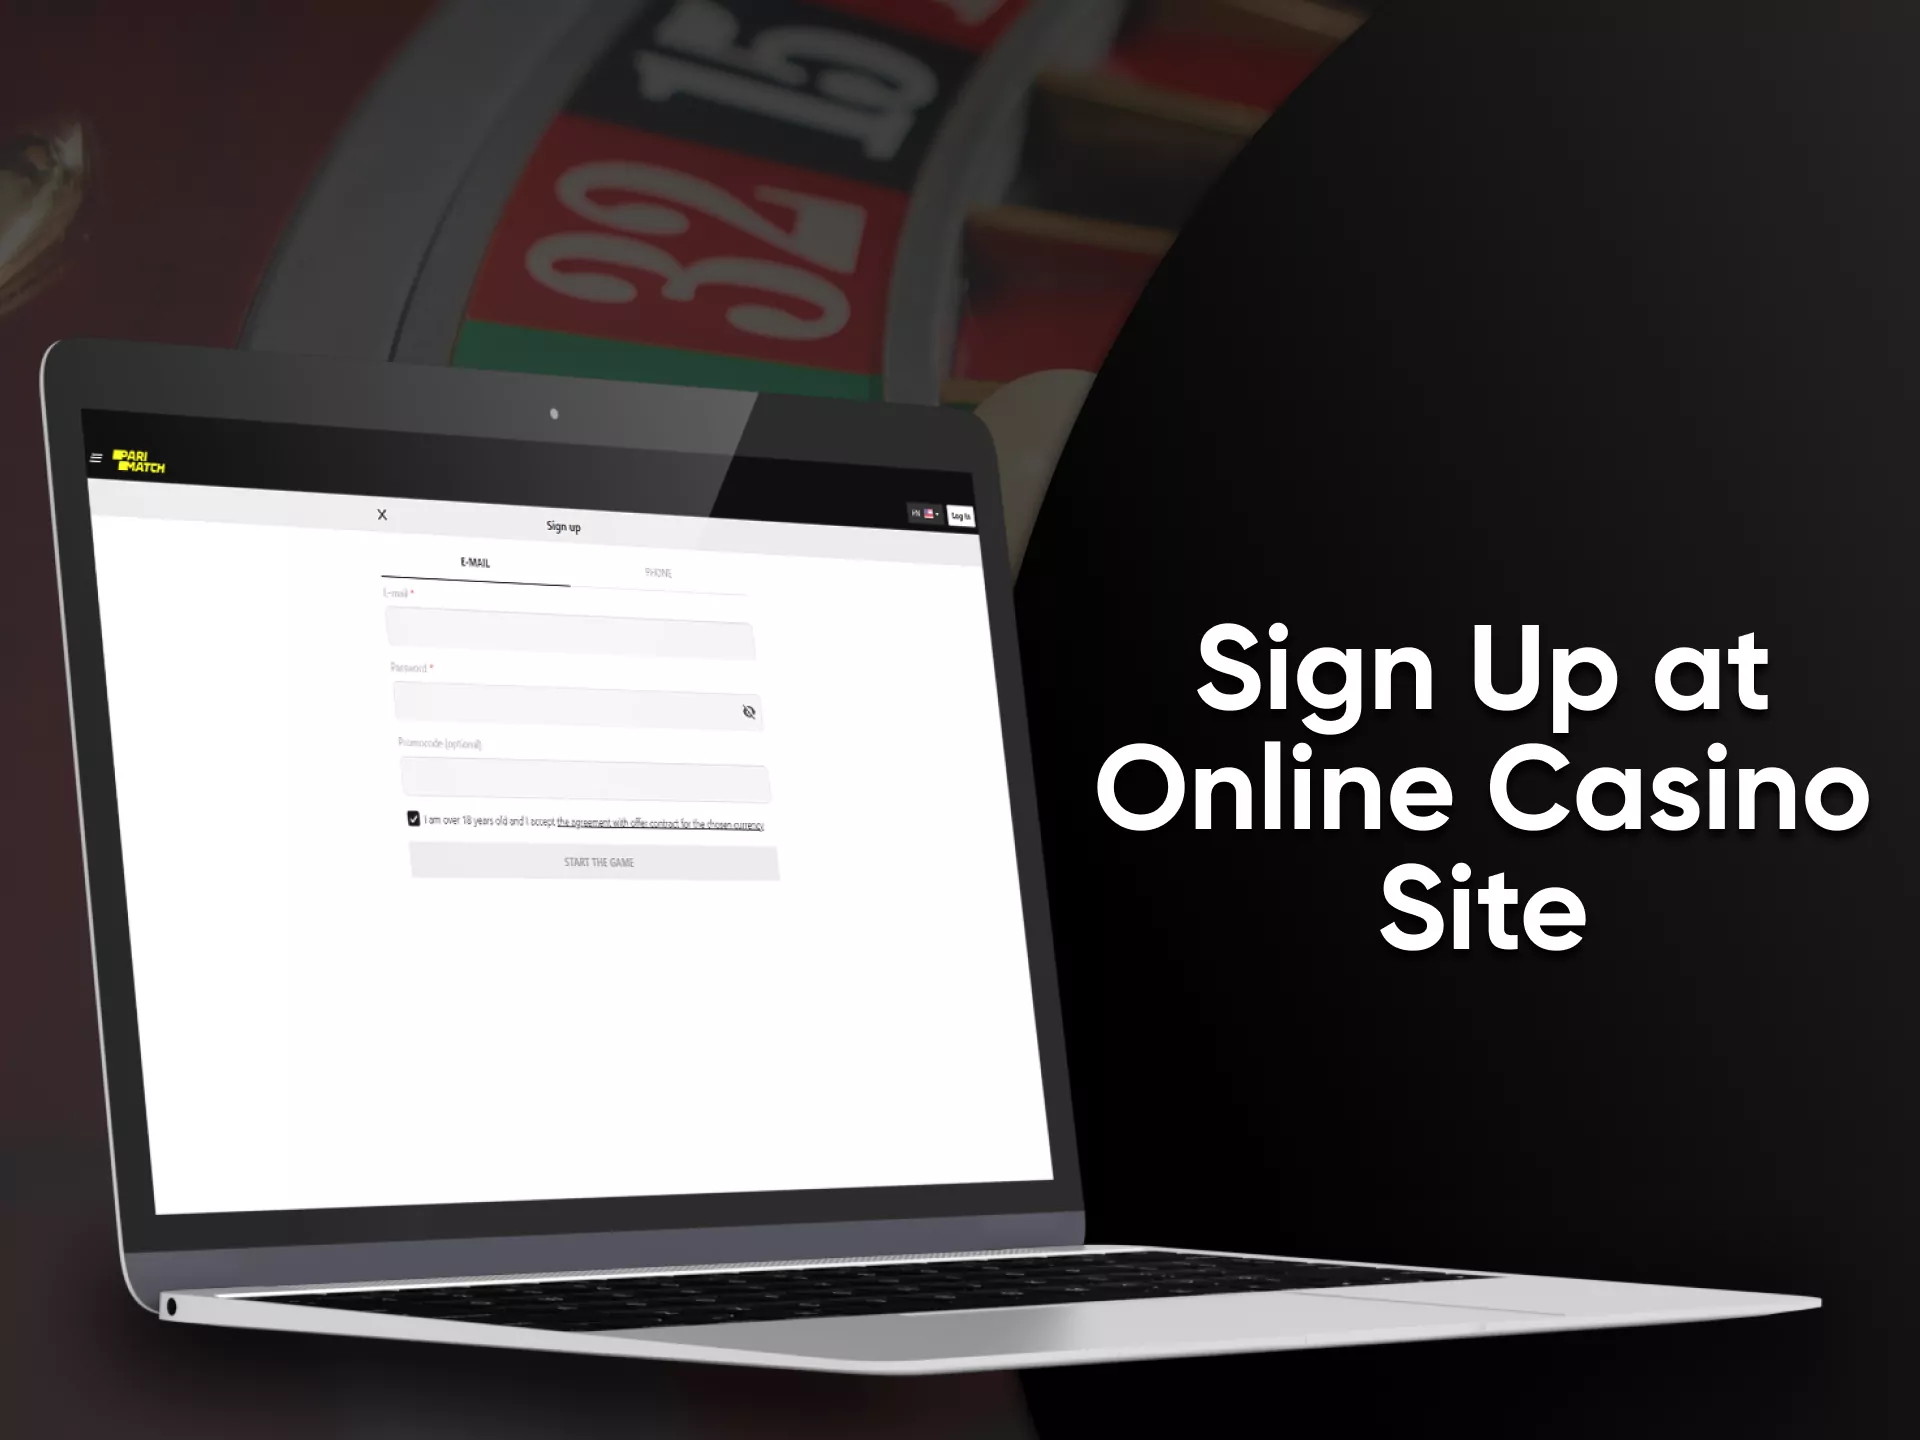 Register before playing online roulette.